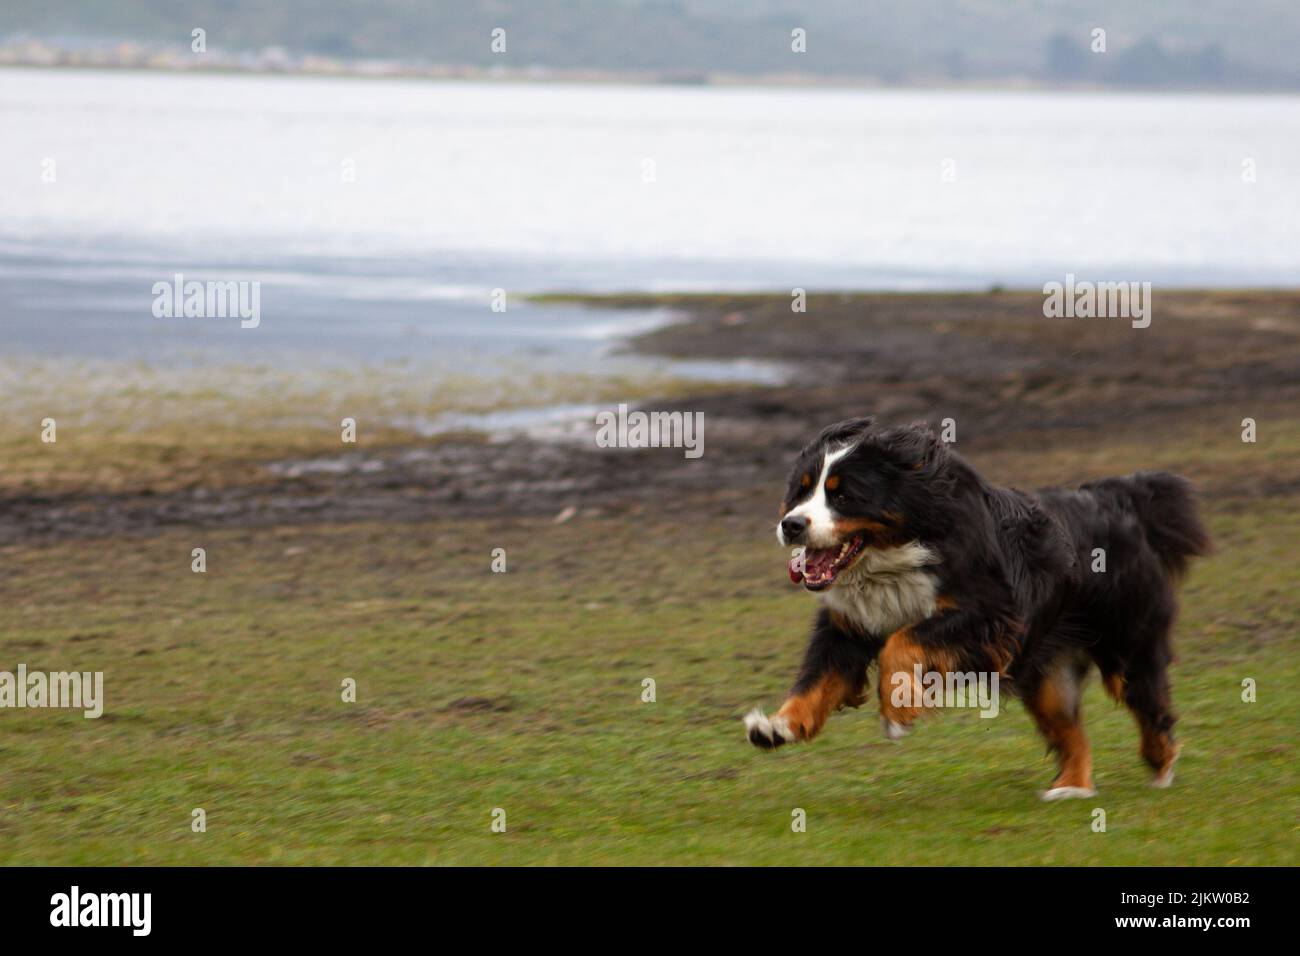 A scenic view of a cute, fluffy dog running in the meadow Stock Photo